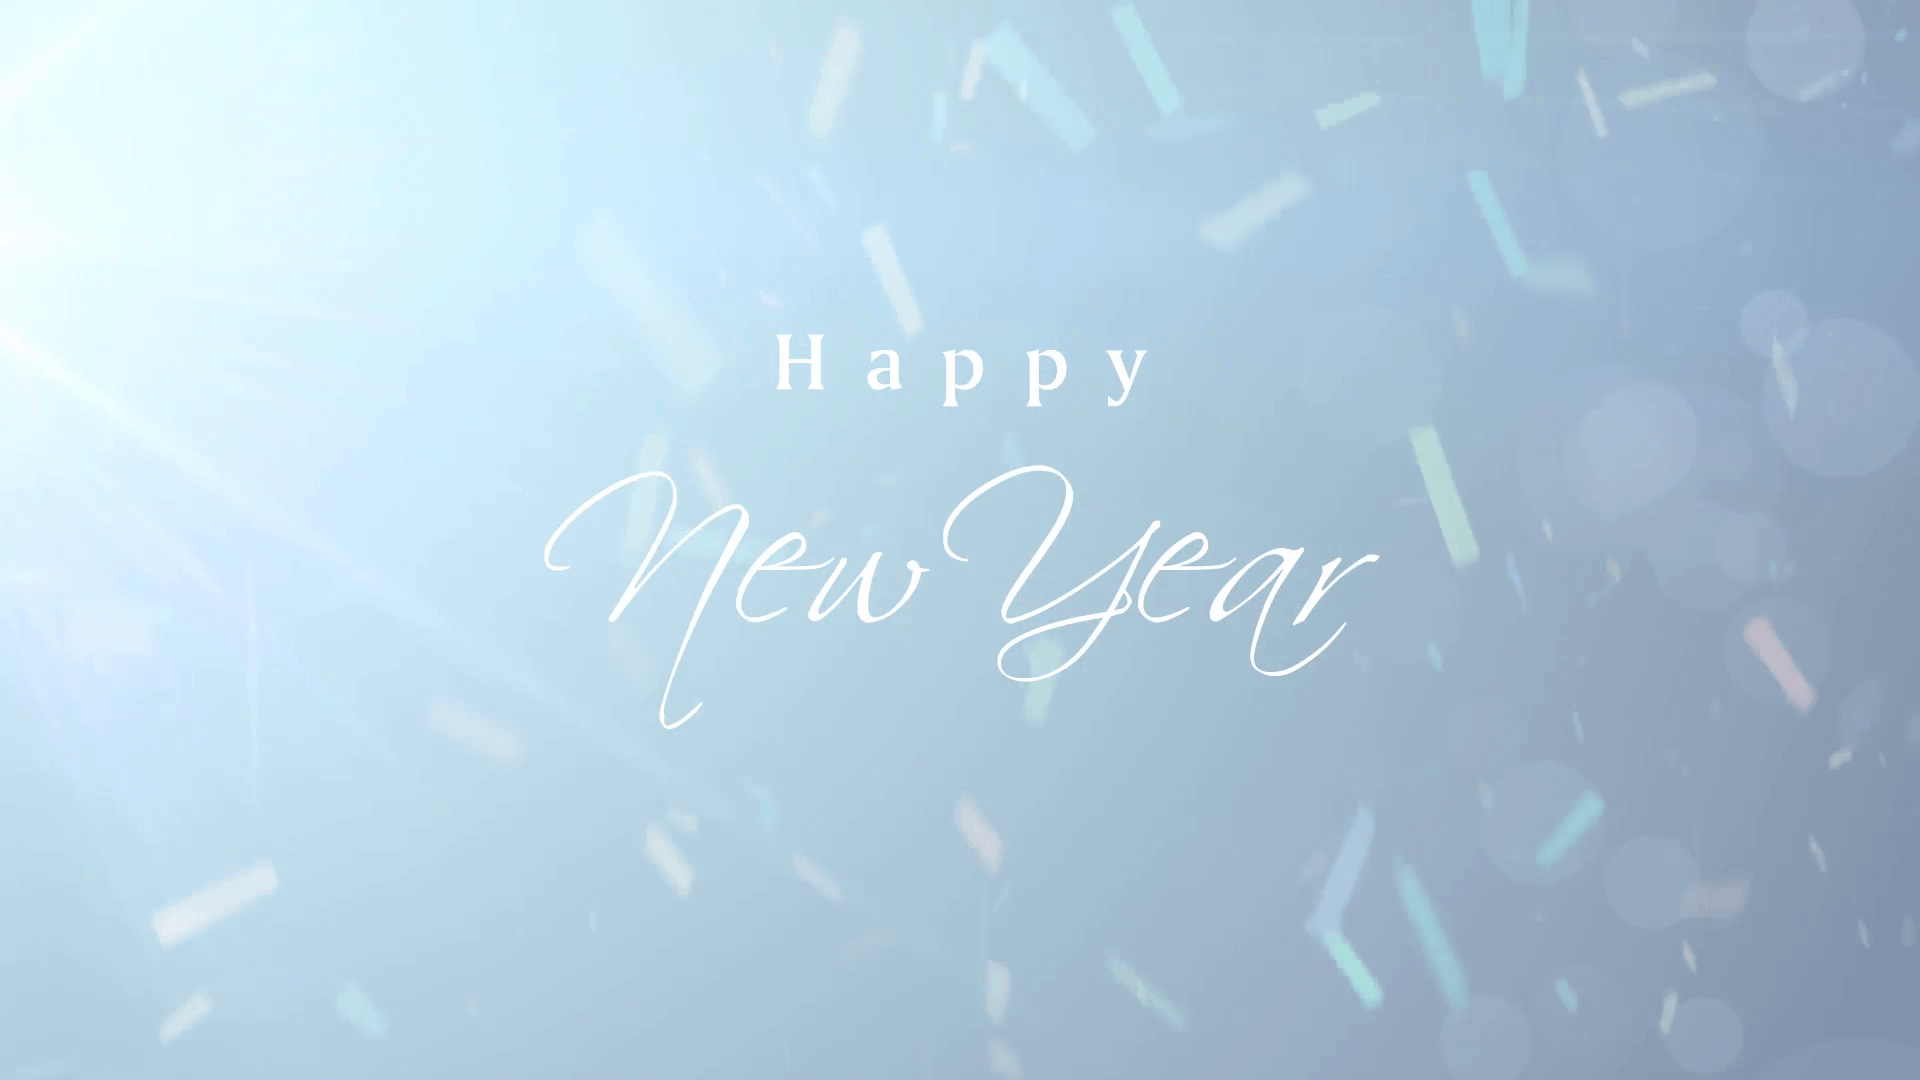 Happy New Year Message with Confetti Motion Background